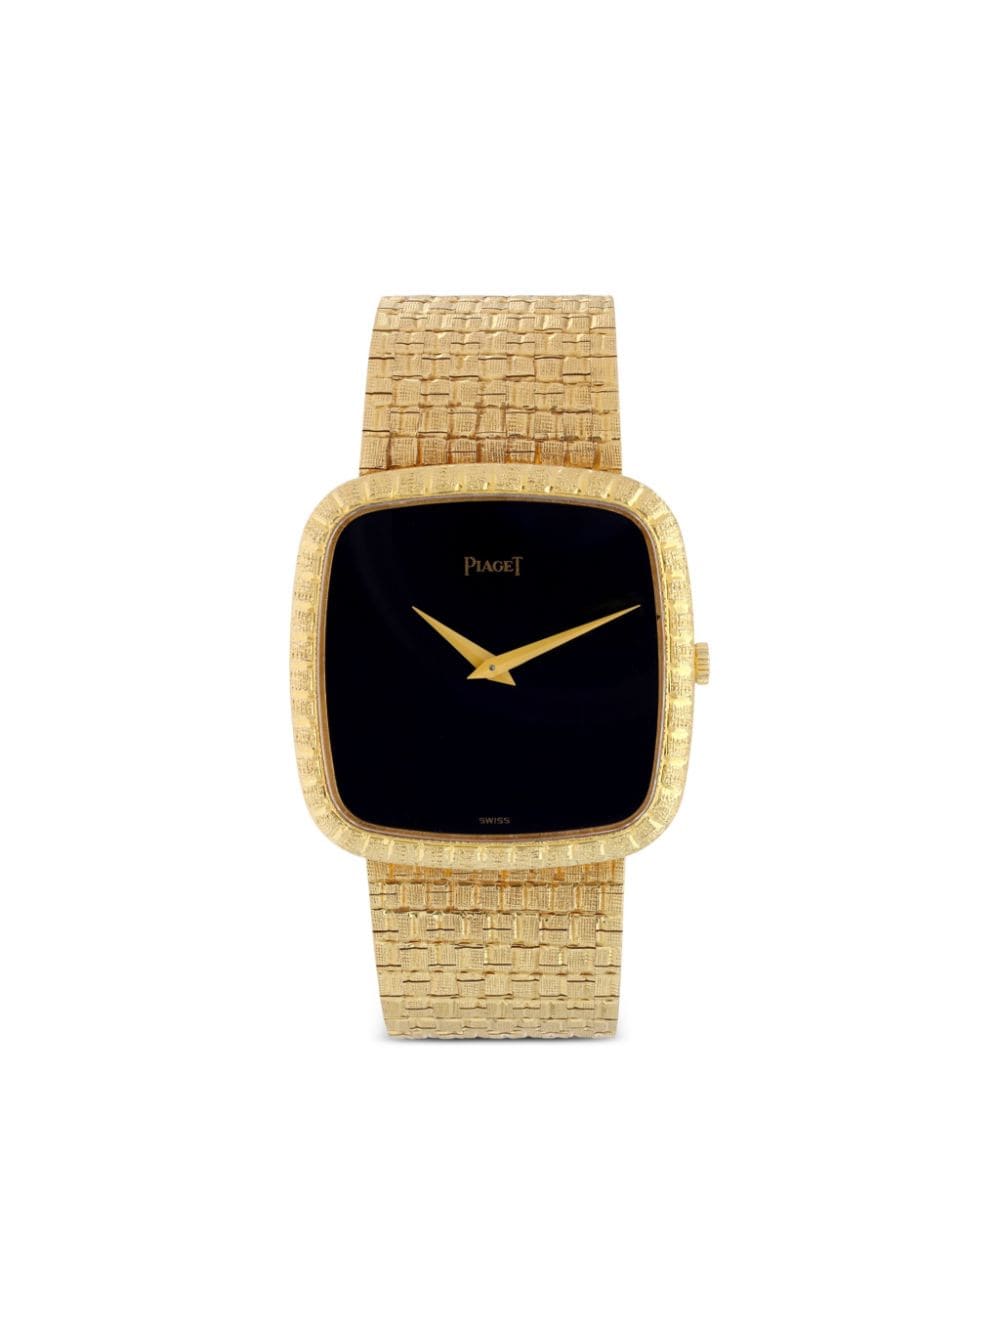 Piaget pre-owned Classic 30mm - Black